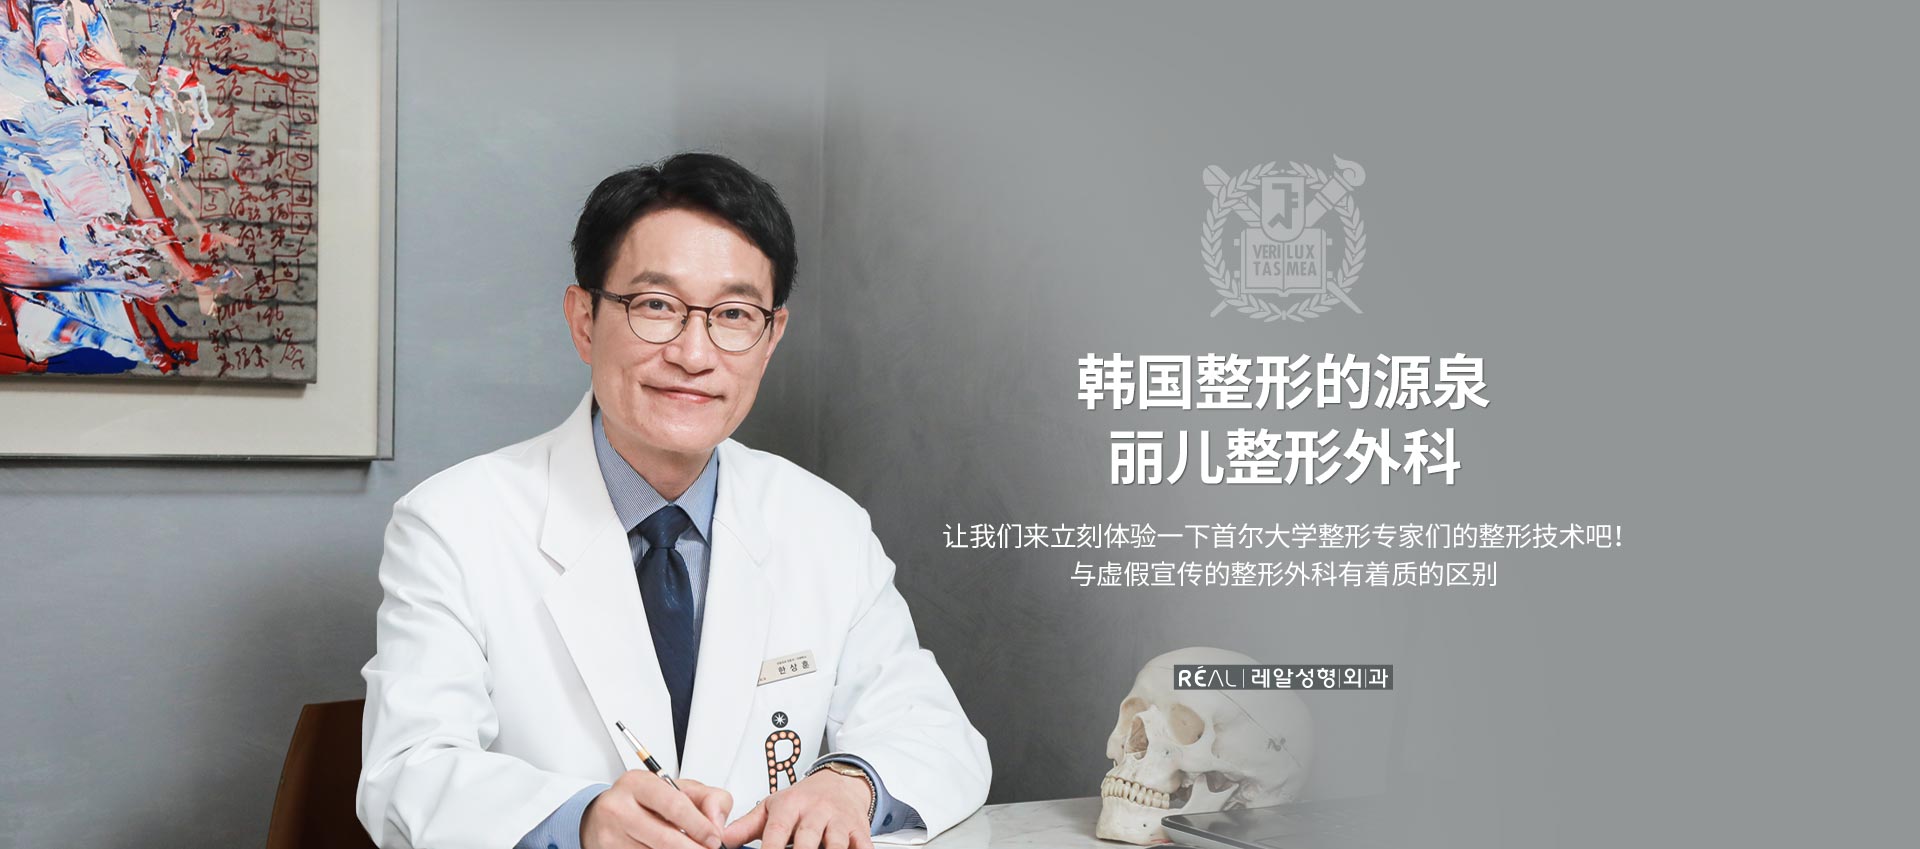 REAL plastic surgery clinic